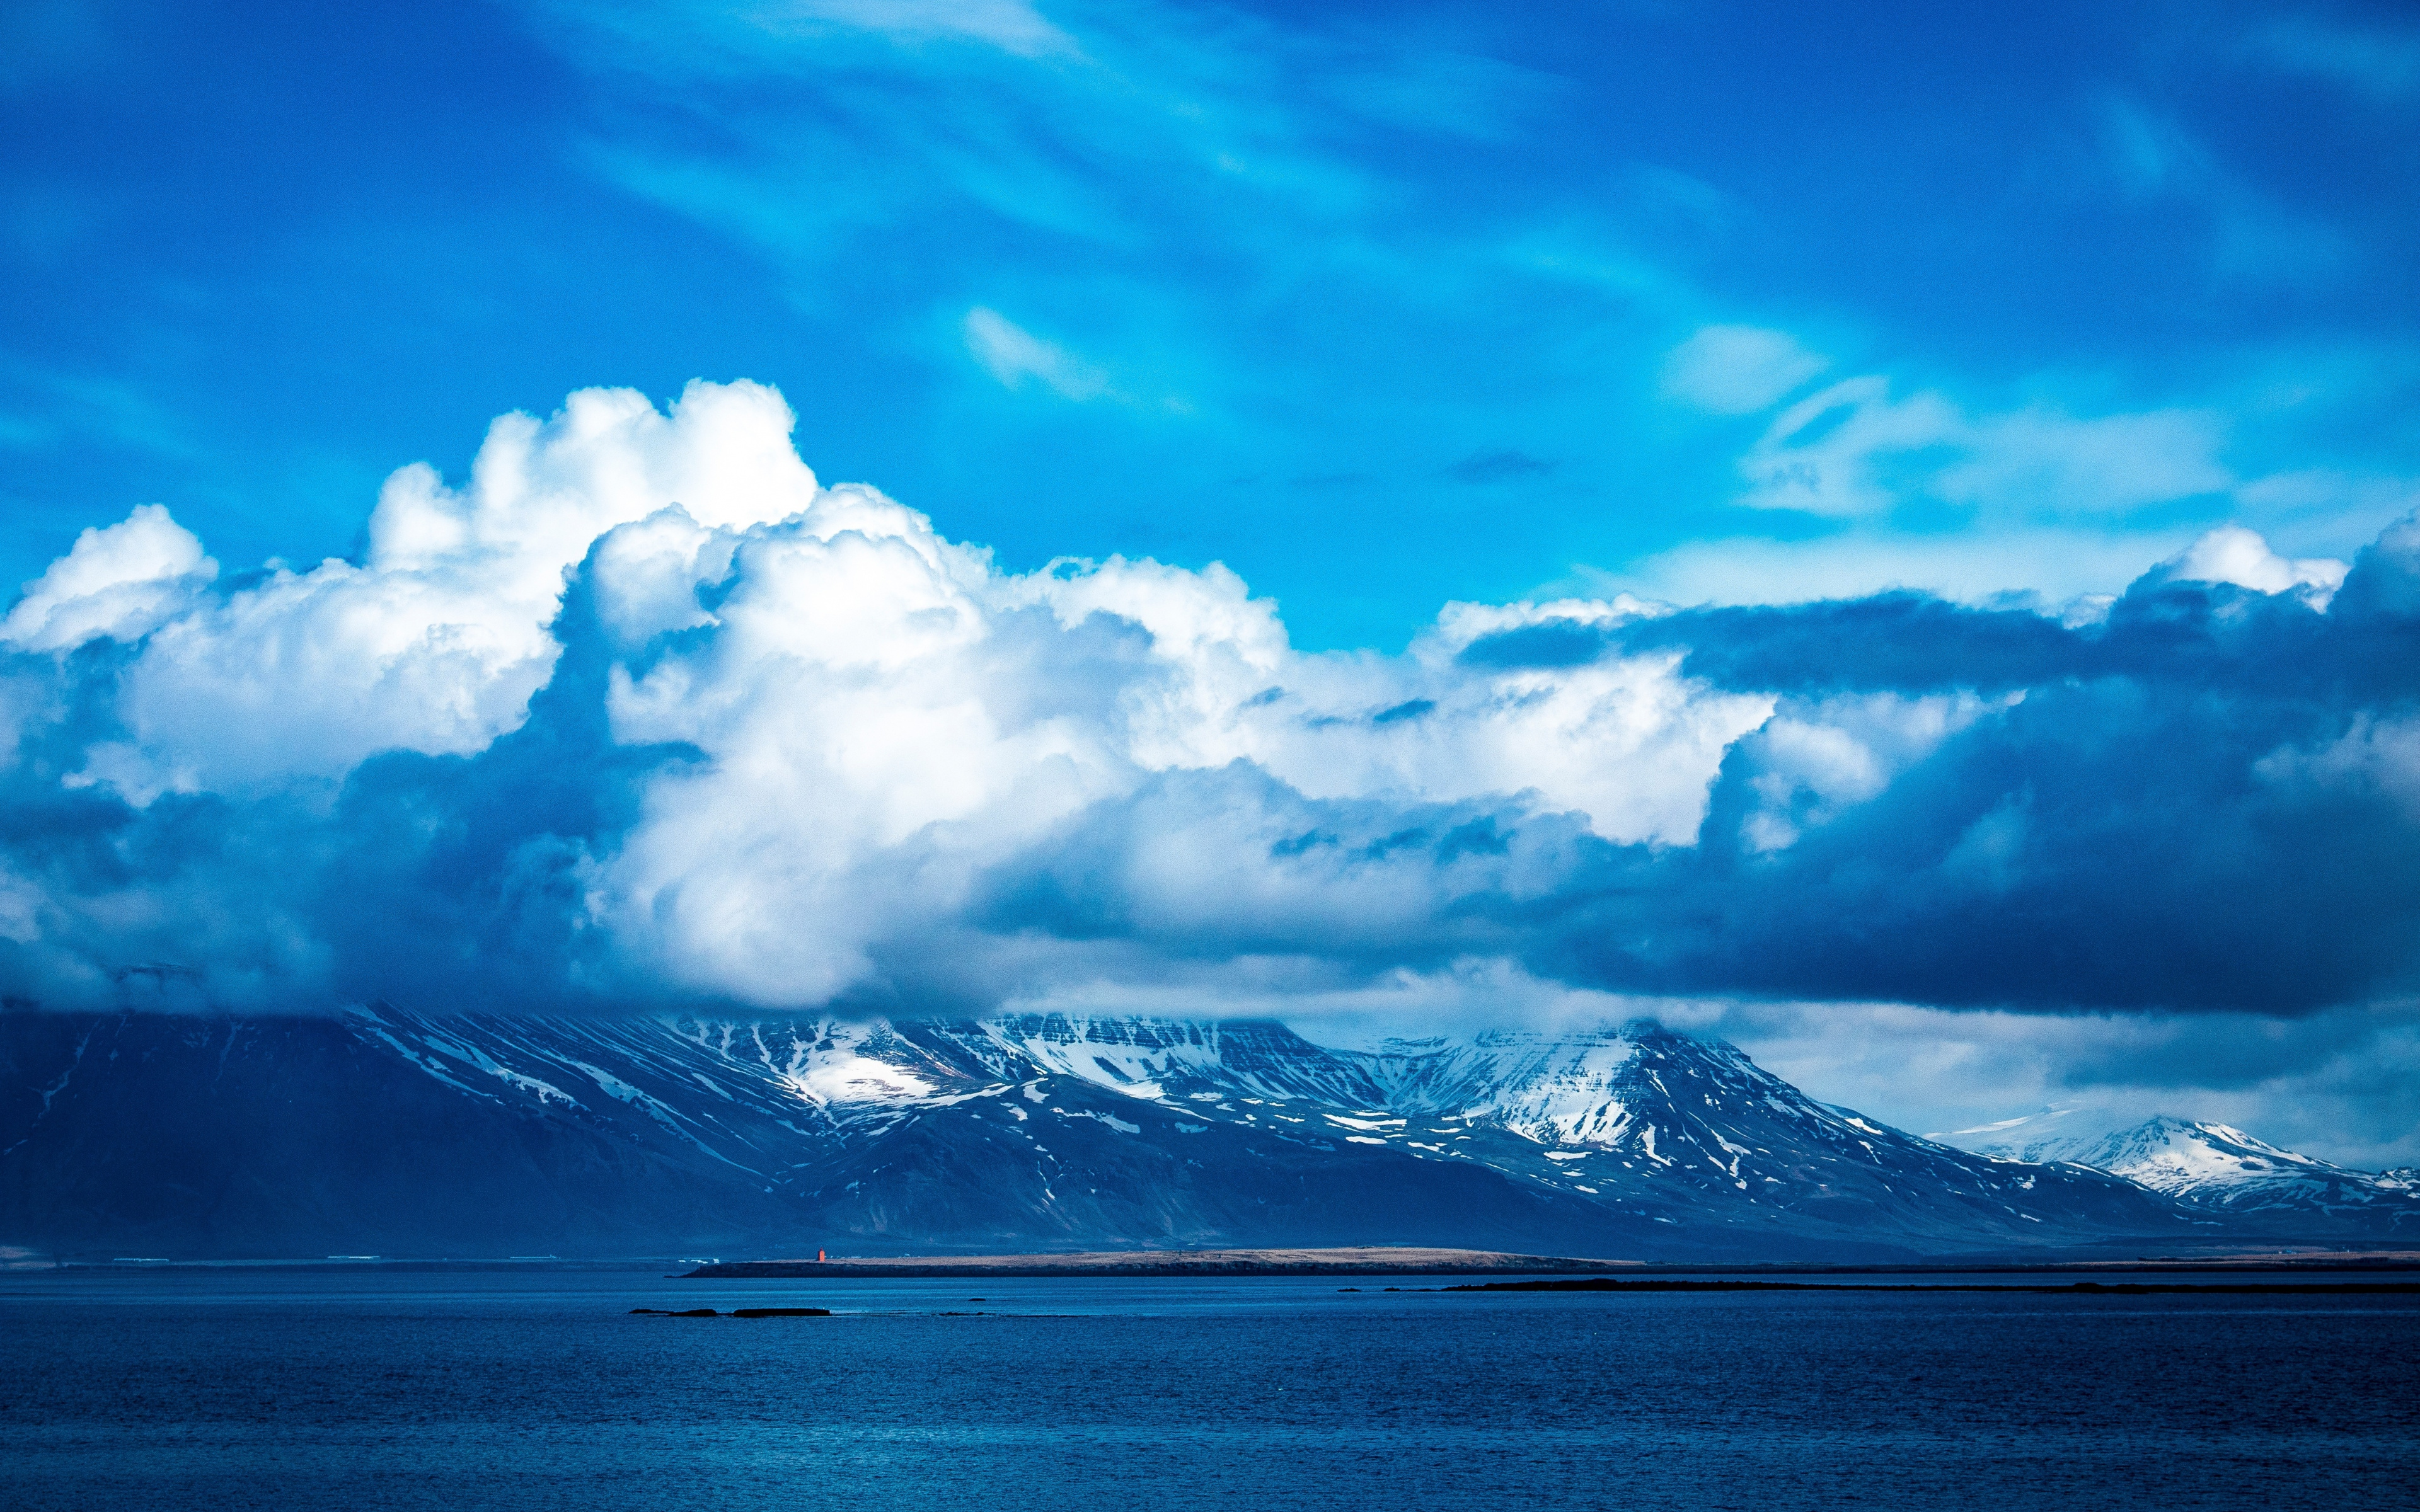 Blue Sky, Clouds, Mountains, Winter, Sea, Nature, Wallpaper - Blue Sky Mountain 4k - HD Wallpaper 